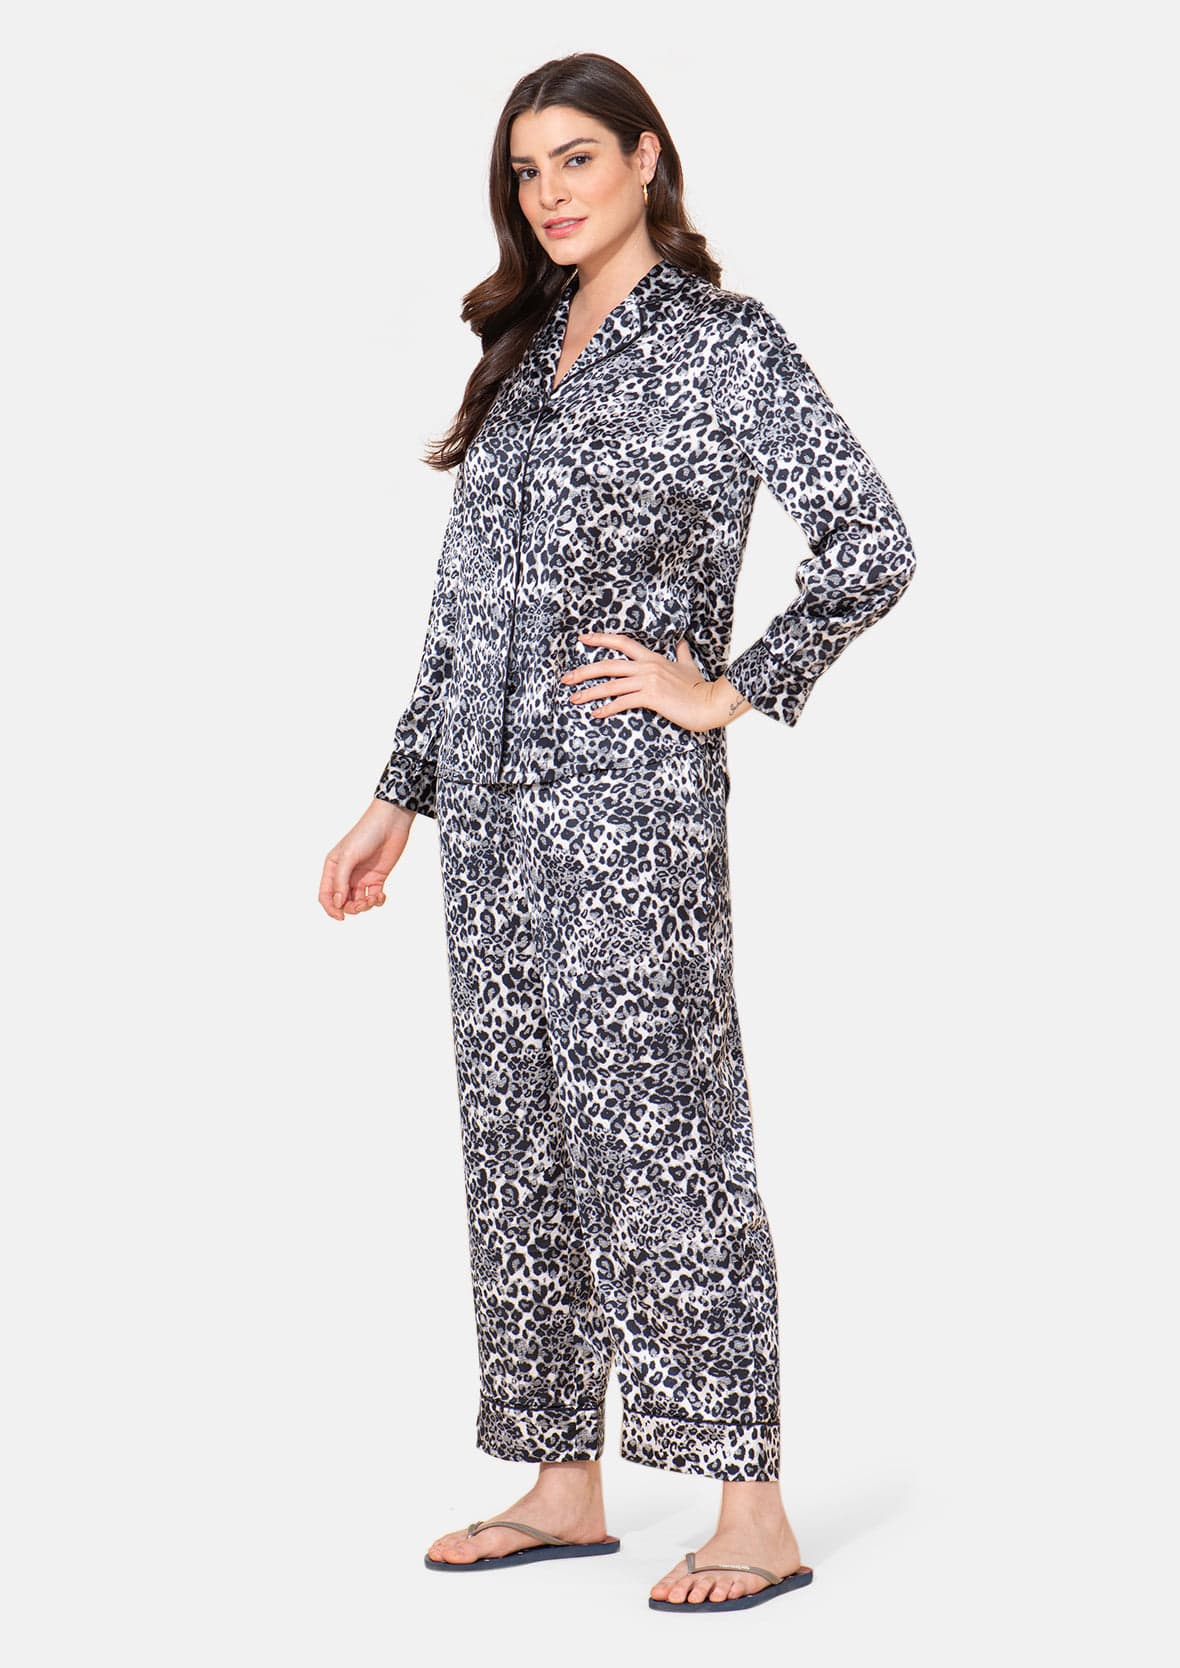 Collared Nightwear Set With Piping Detail